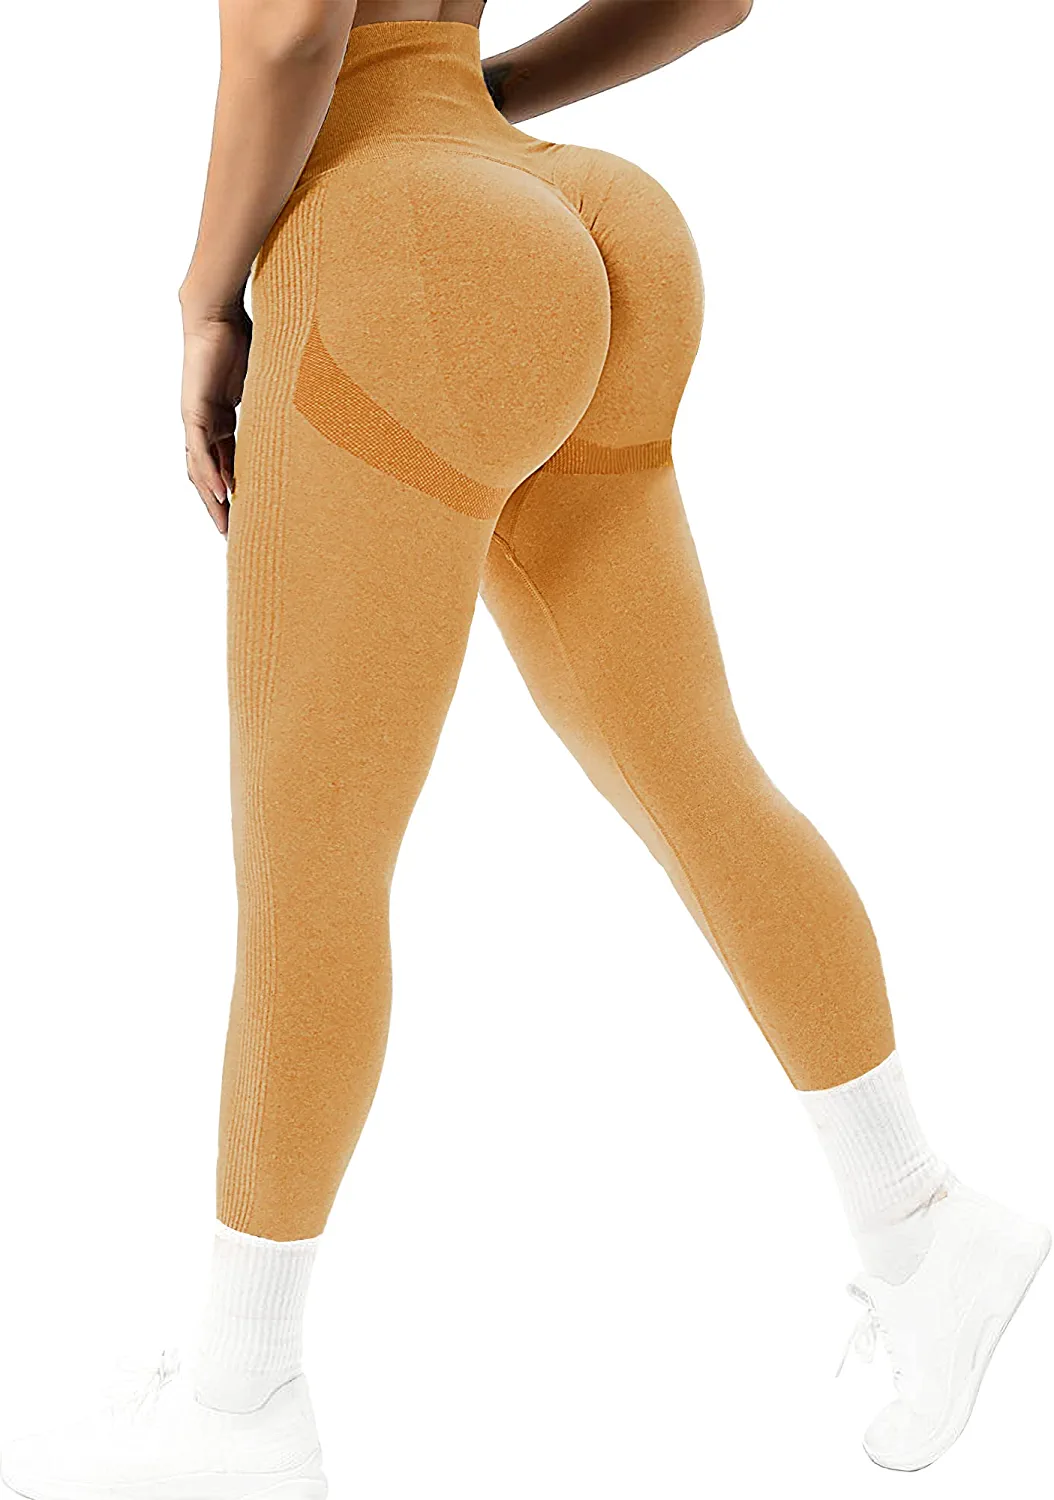 LSLJS Women's Tights Womens High Waist Yoga Pants Tummy Control Slimming  Booty Leggings Workout Running Butt Lift Tights With Pockets on Clearance